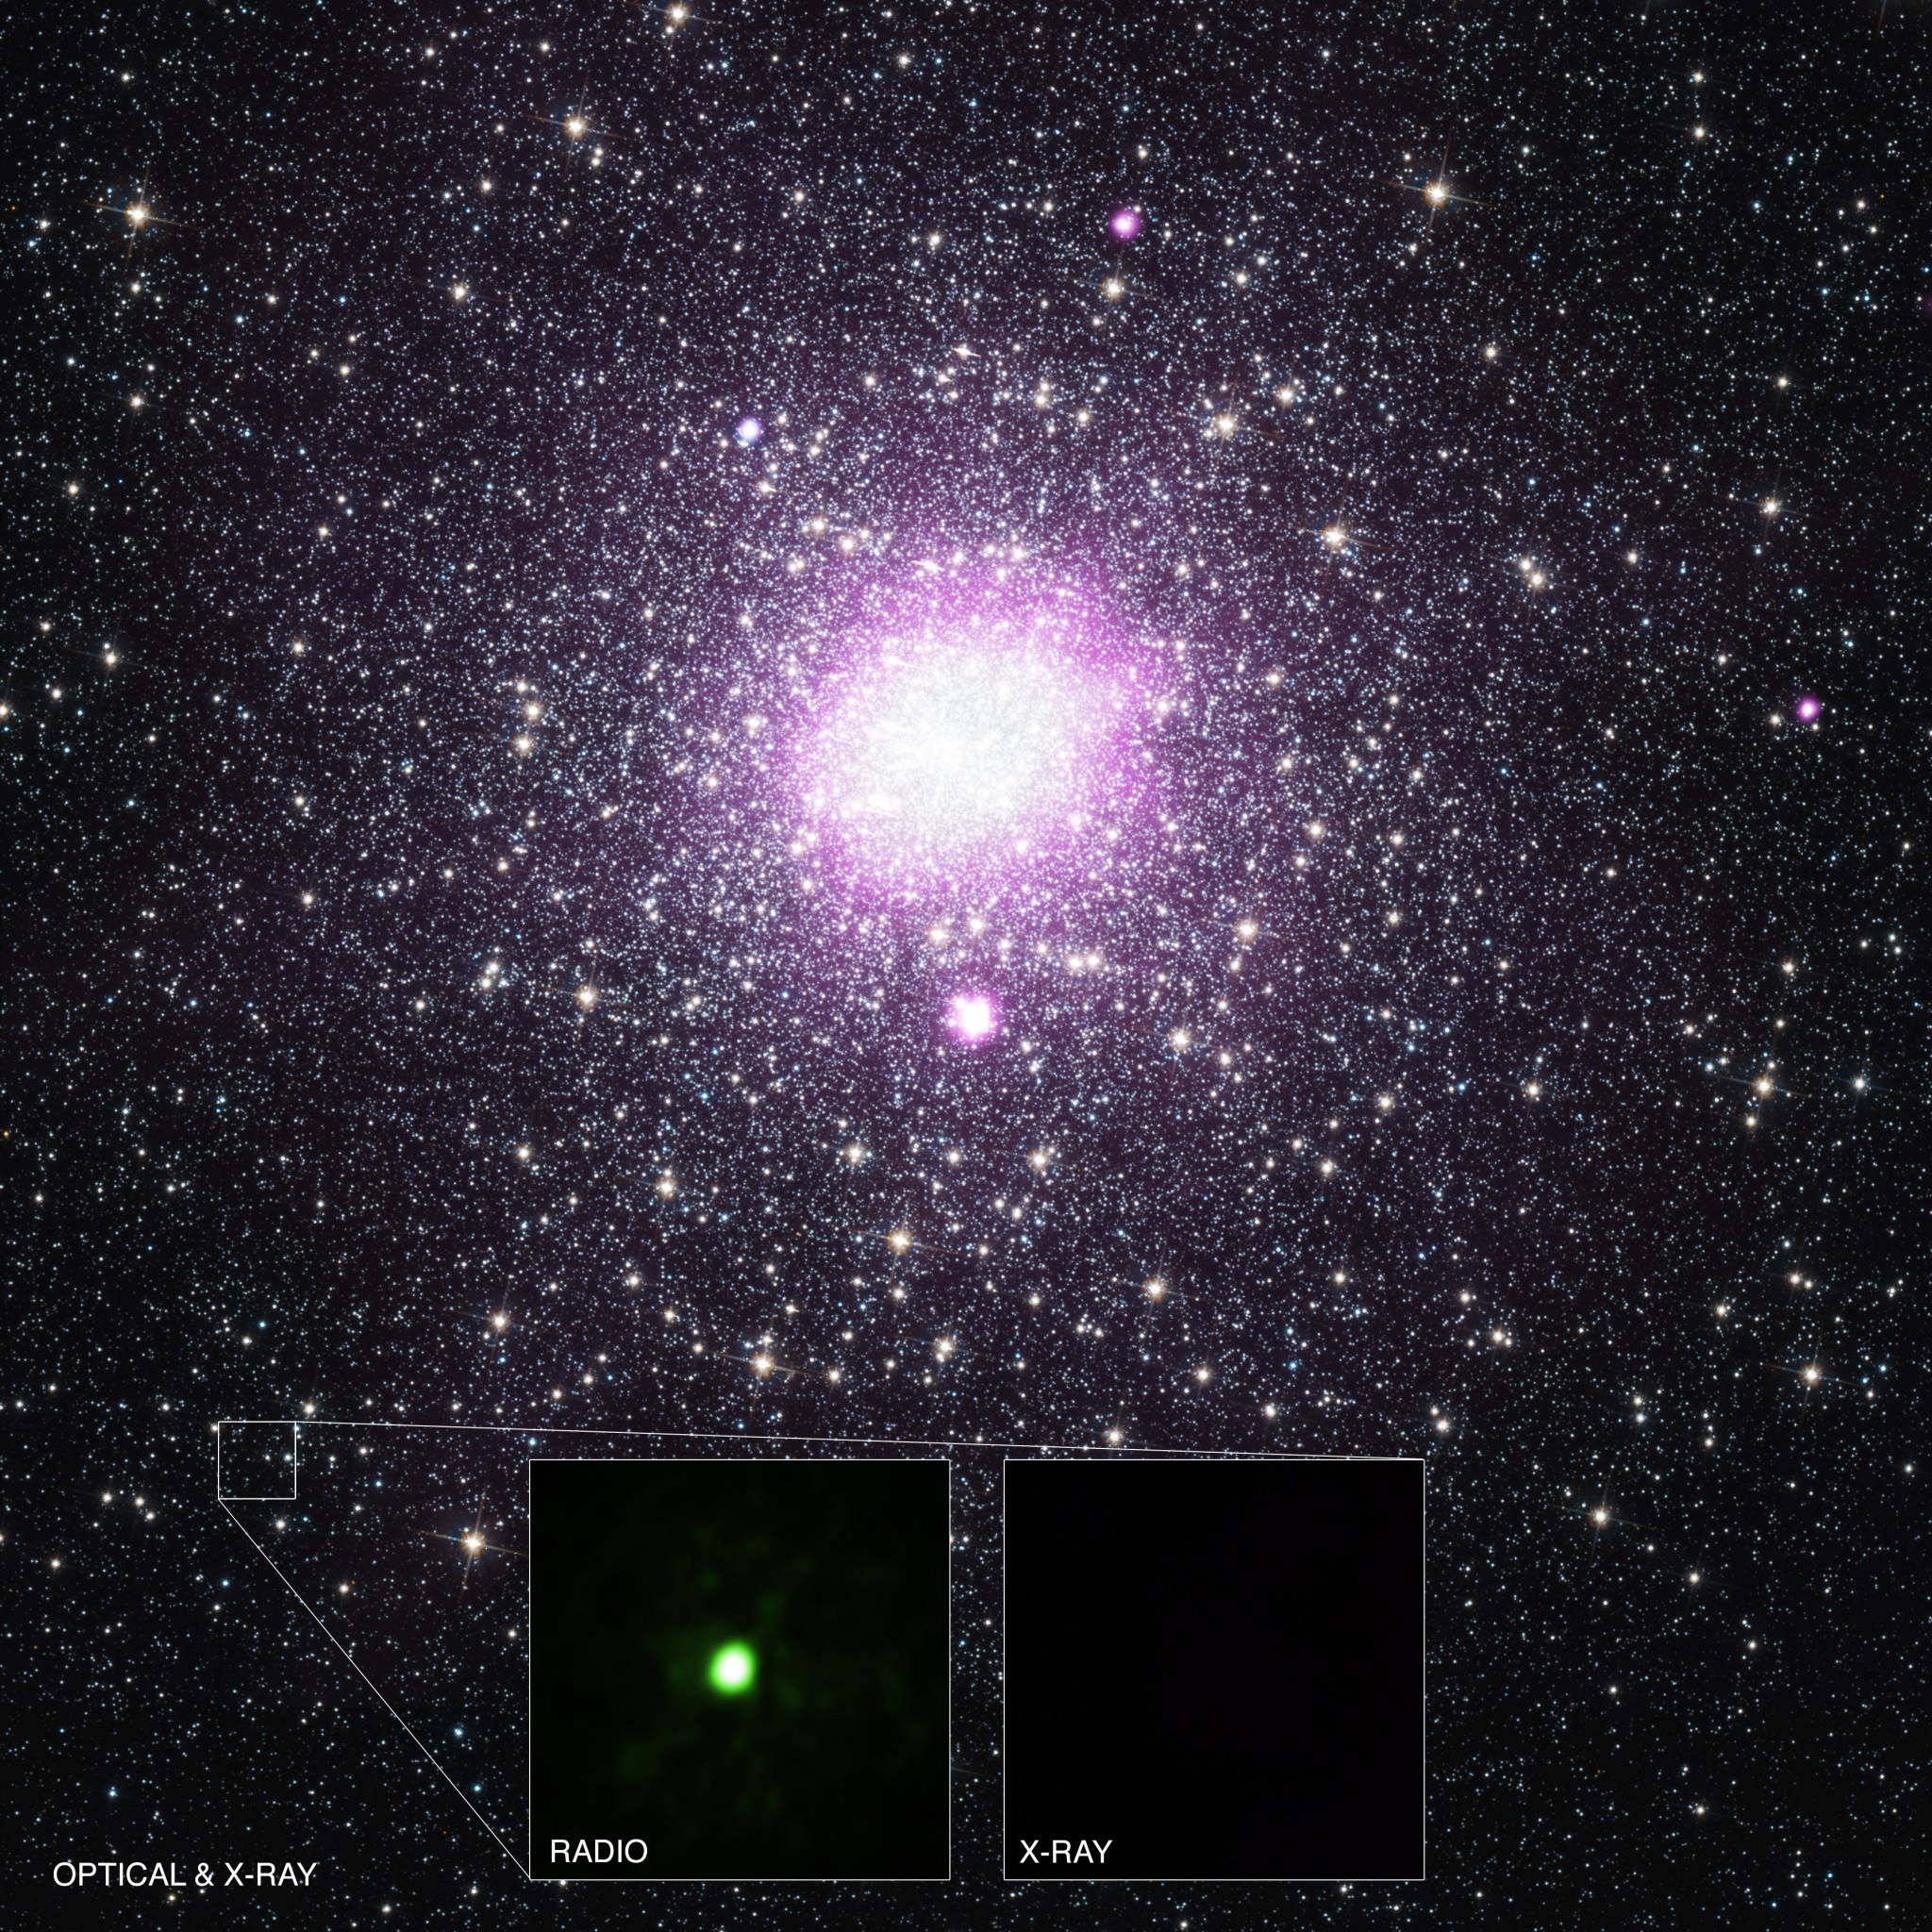 Object VLA J2130+12 close to the line of sight to the globular cluster M15.